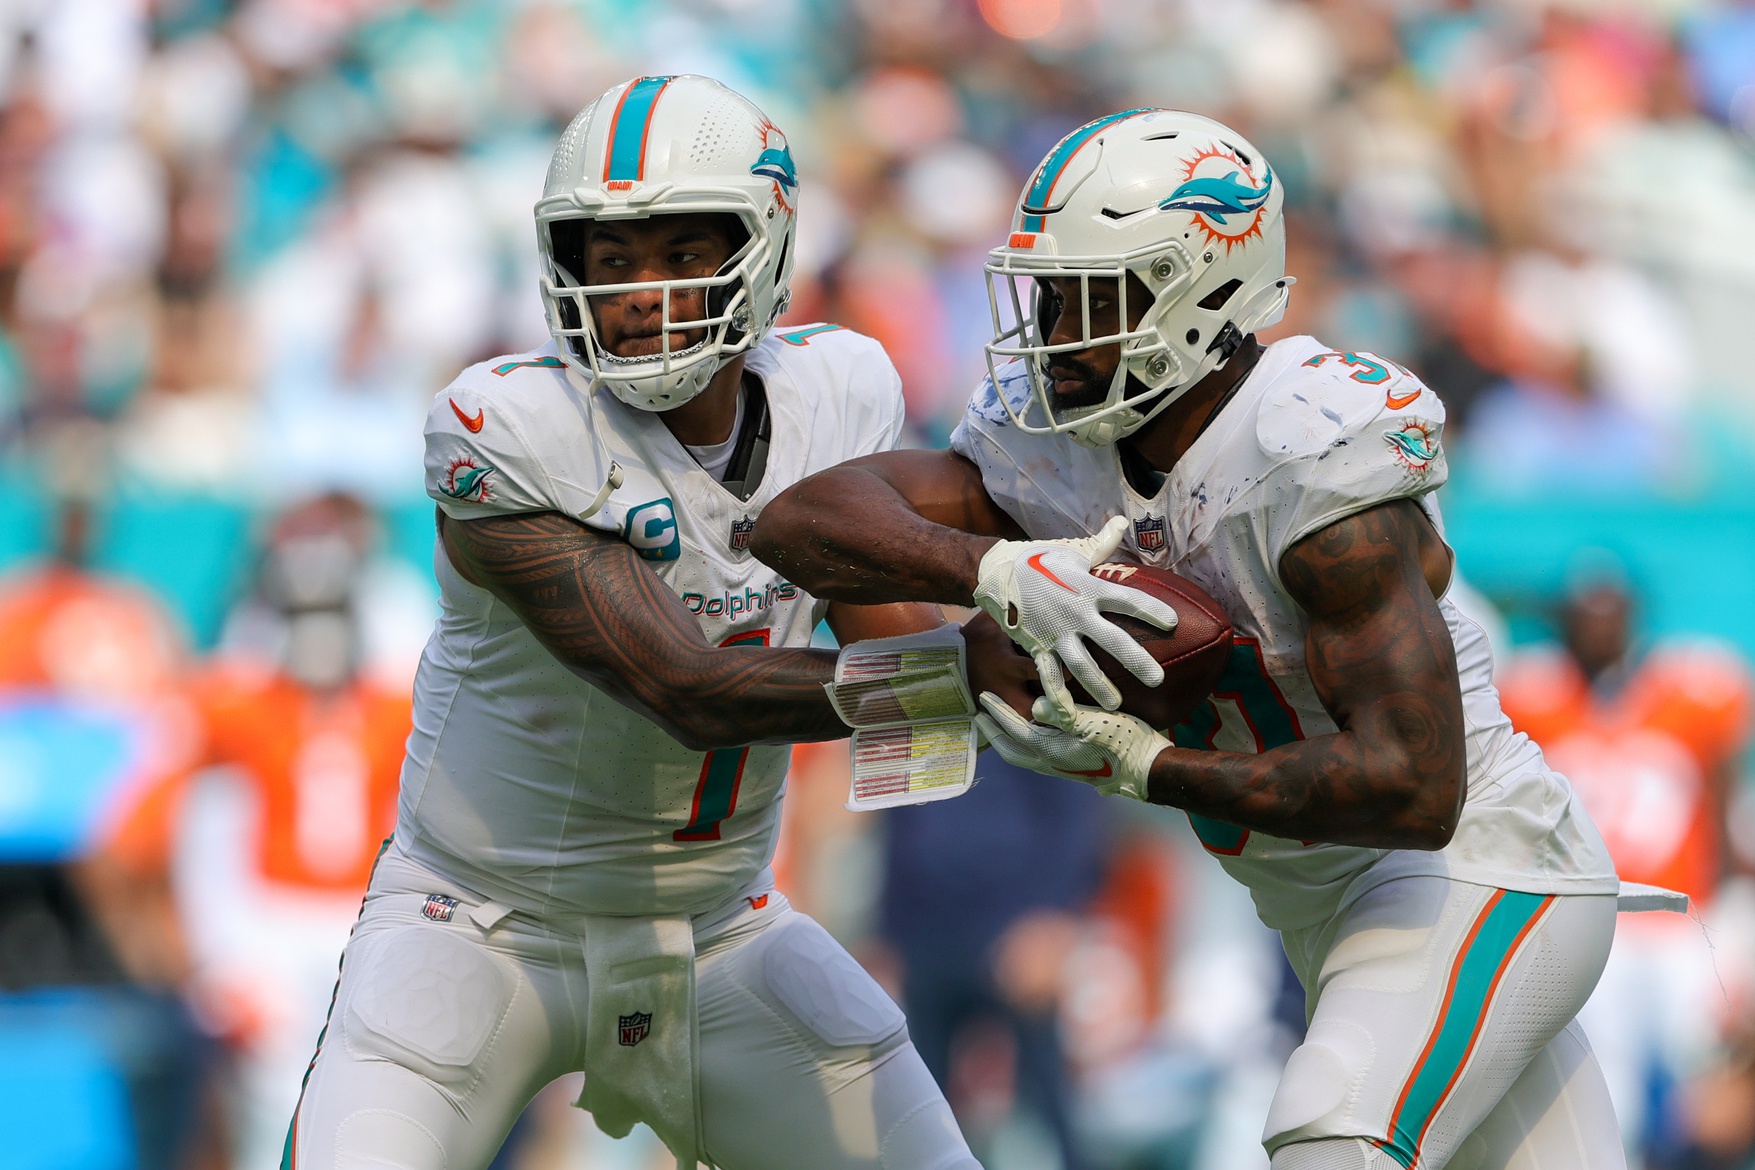 NY Giants vs. Dolphins picks against the spread, total and moneyline